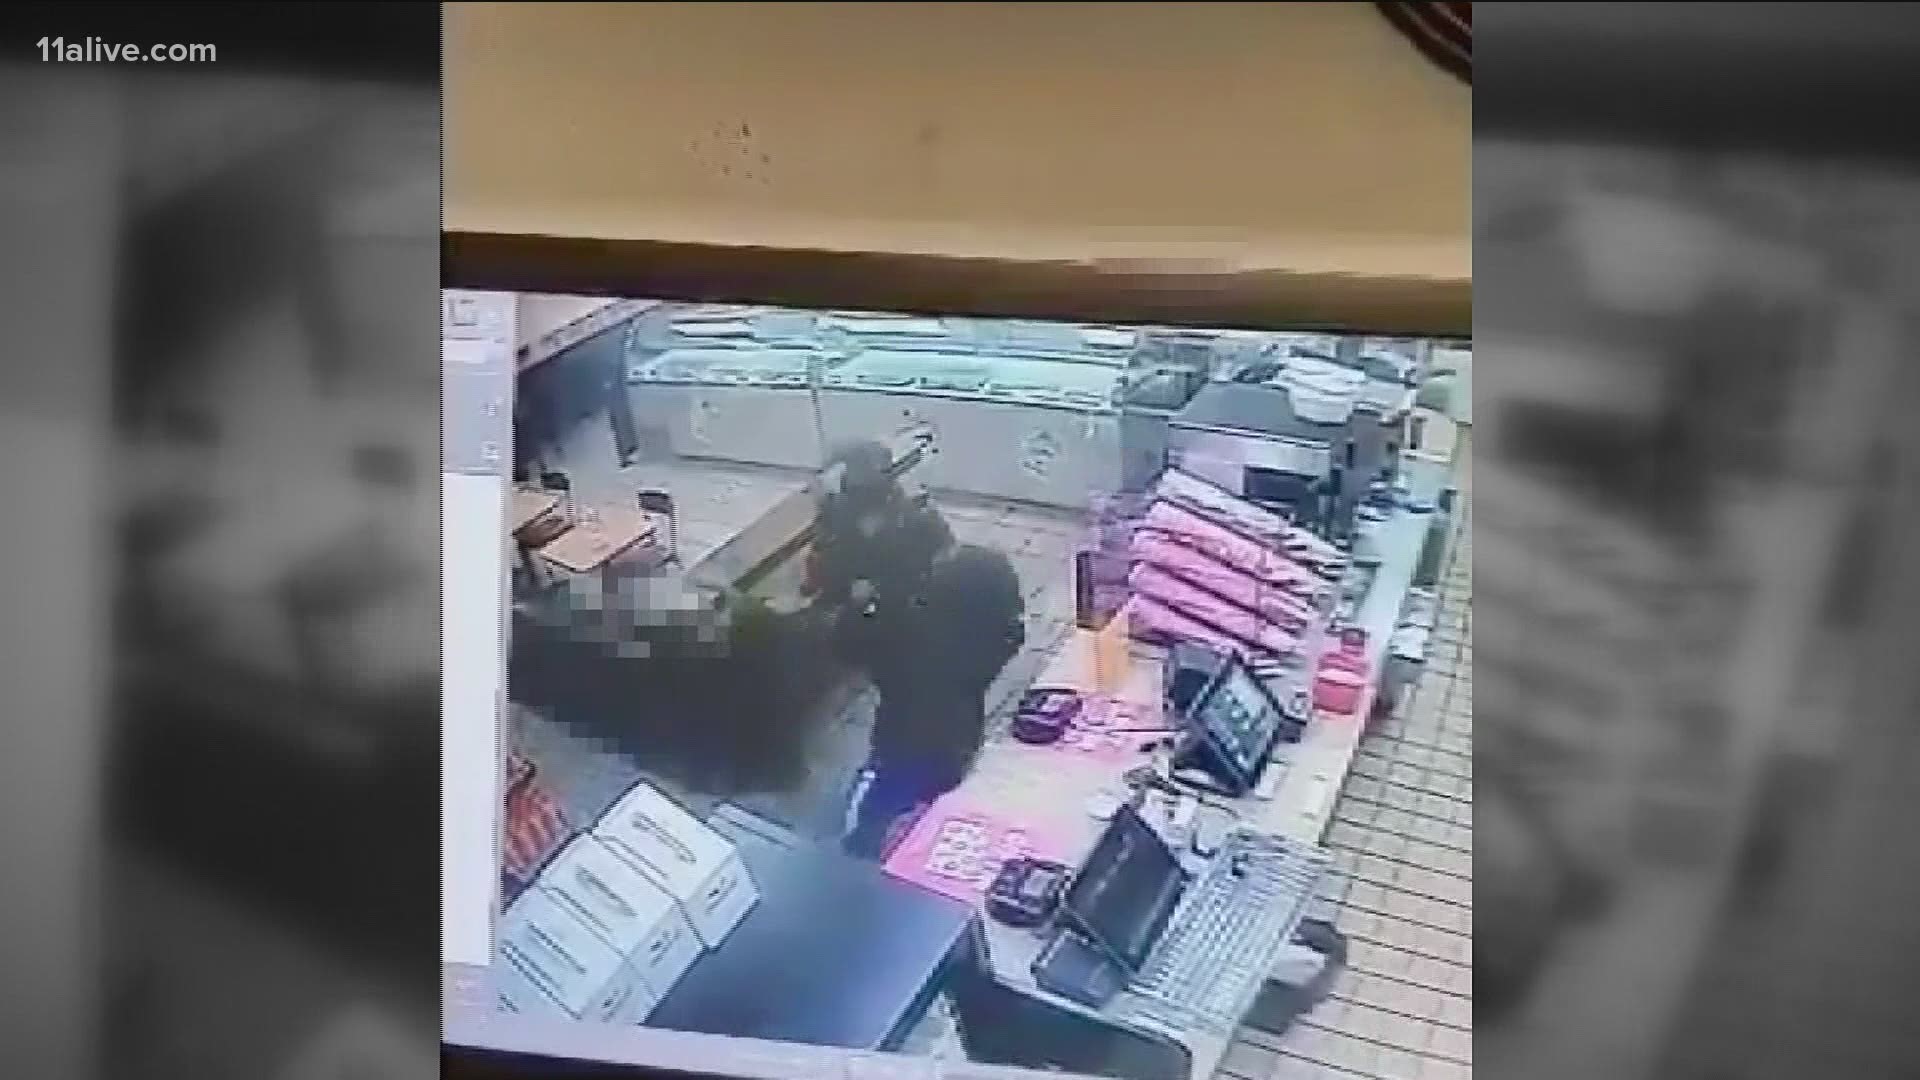 Dunkin Donuts teen employee stabbing: New video released | 11alive.com